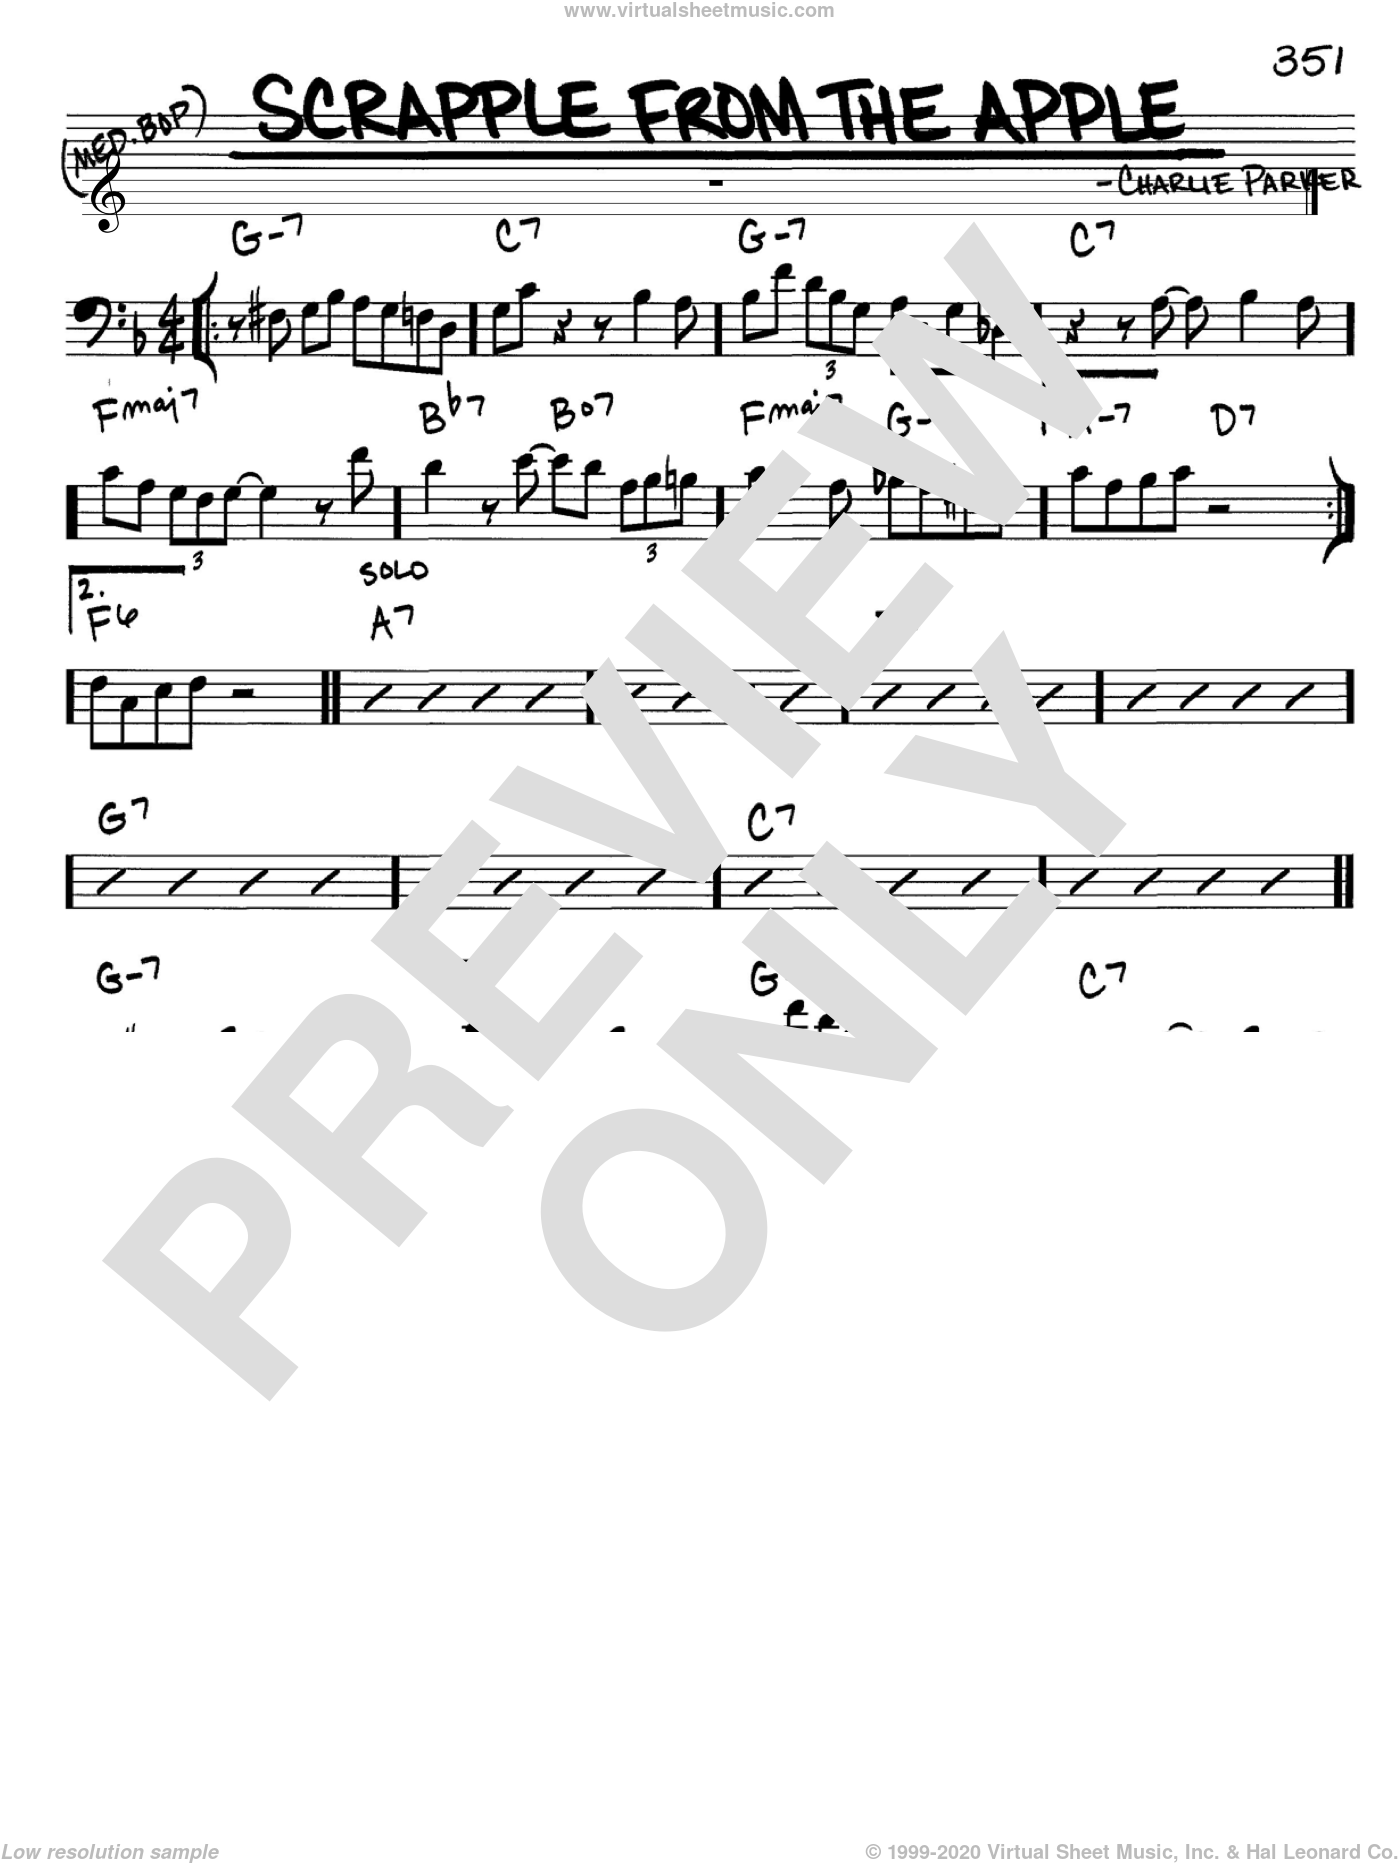 real easy book bass clef pdf viewer